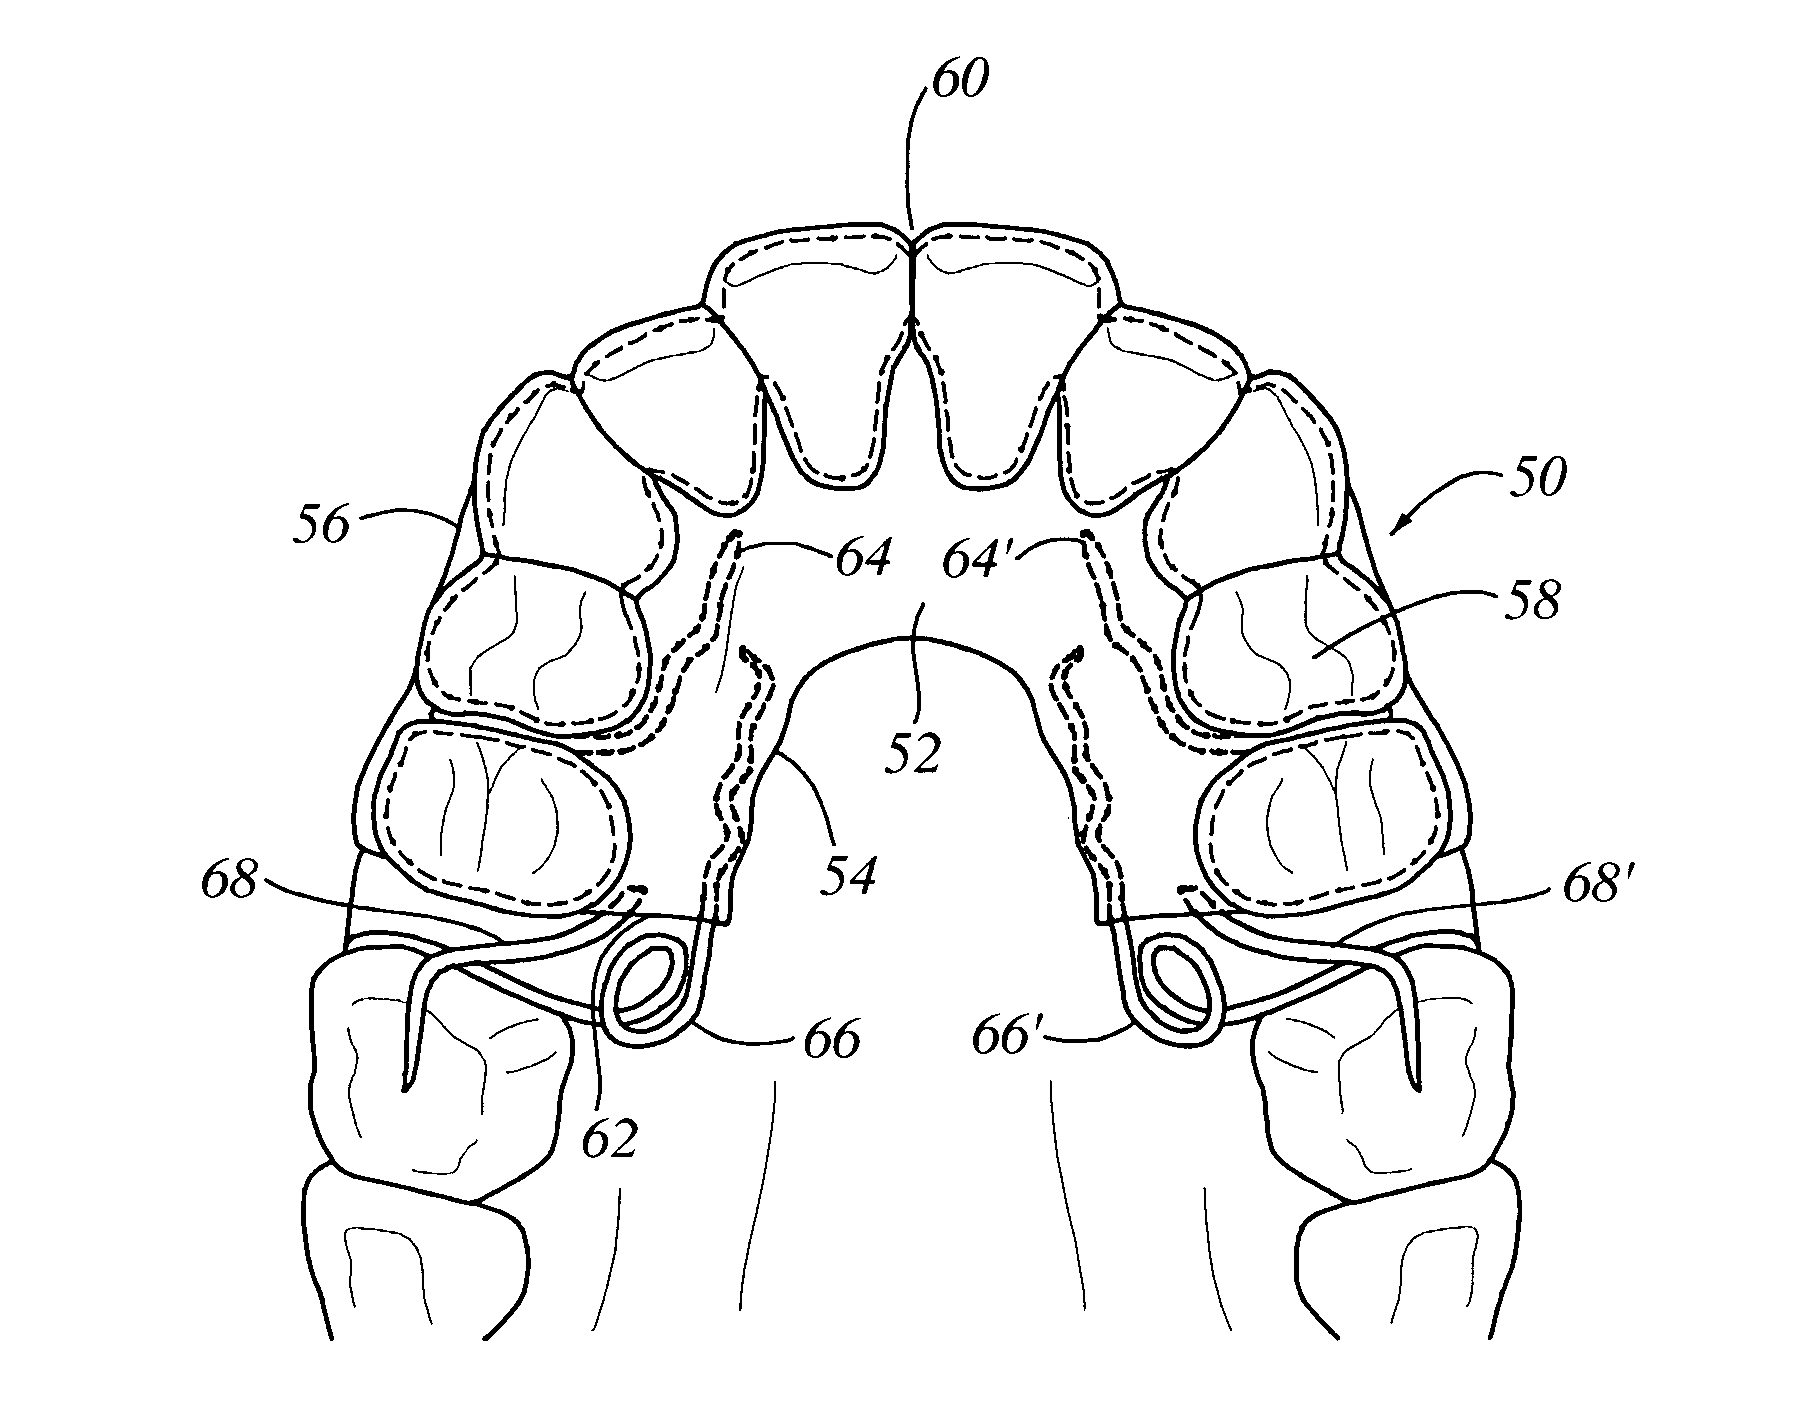 Orthodontic appliance with embedded wire for moving teeth